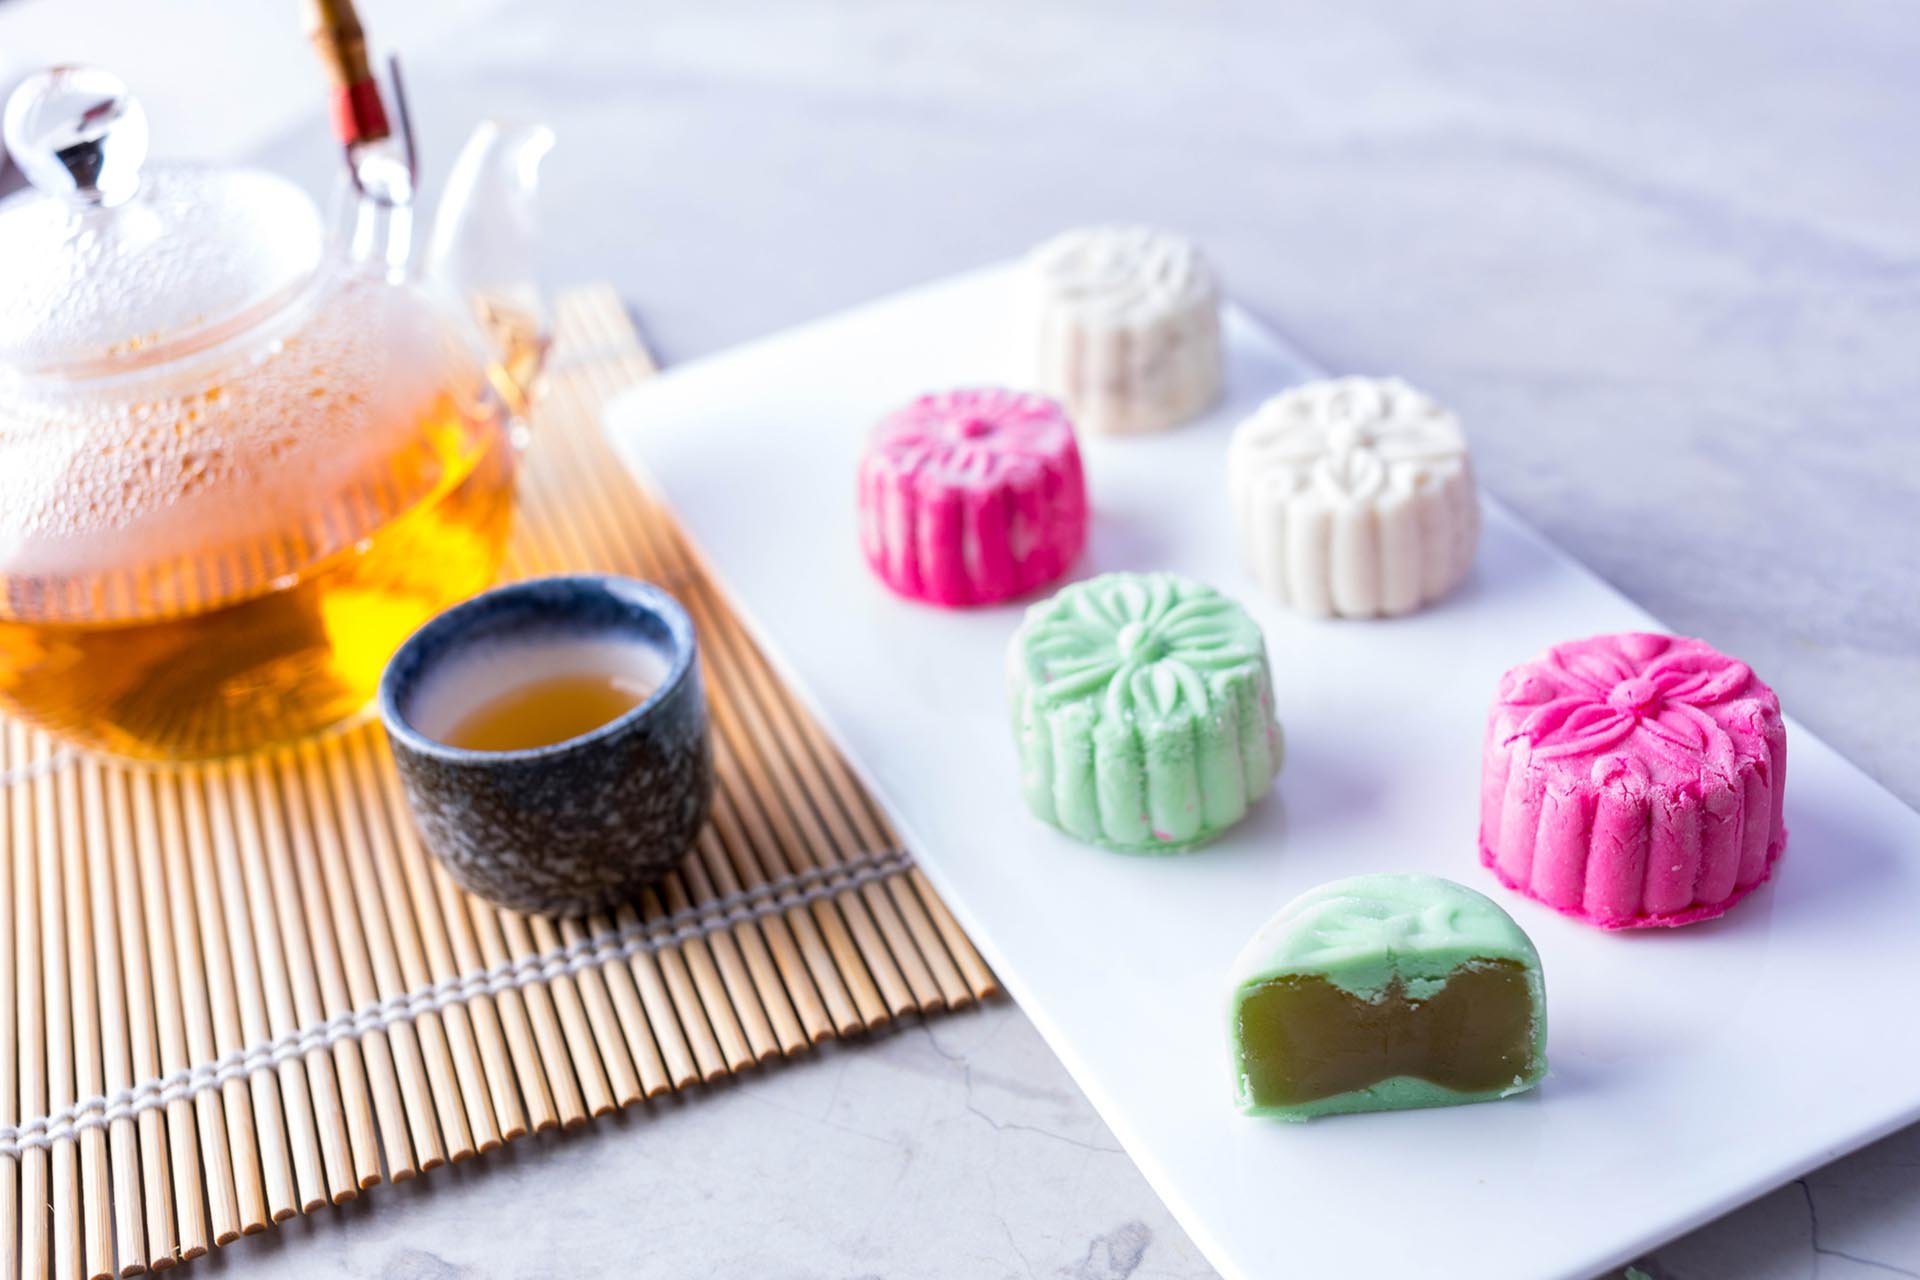 No-bake Snowskin Mooncake A Cute and Tasty Mooncake from Hong Kong. emmymad...